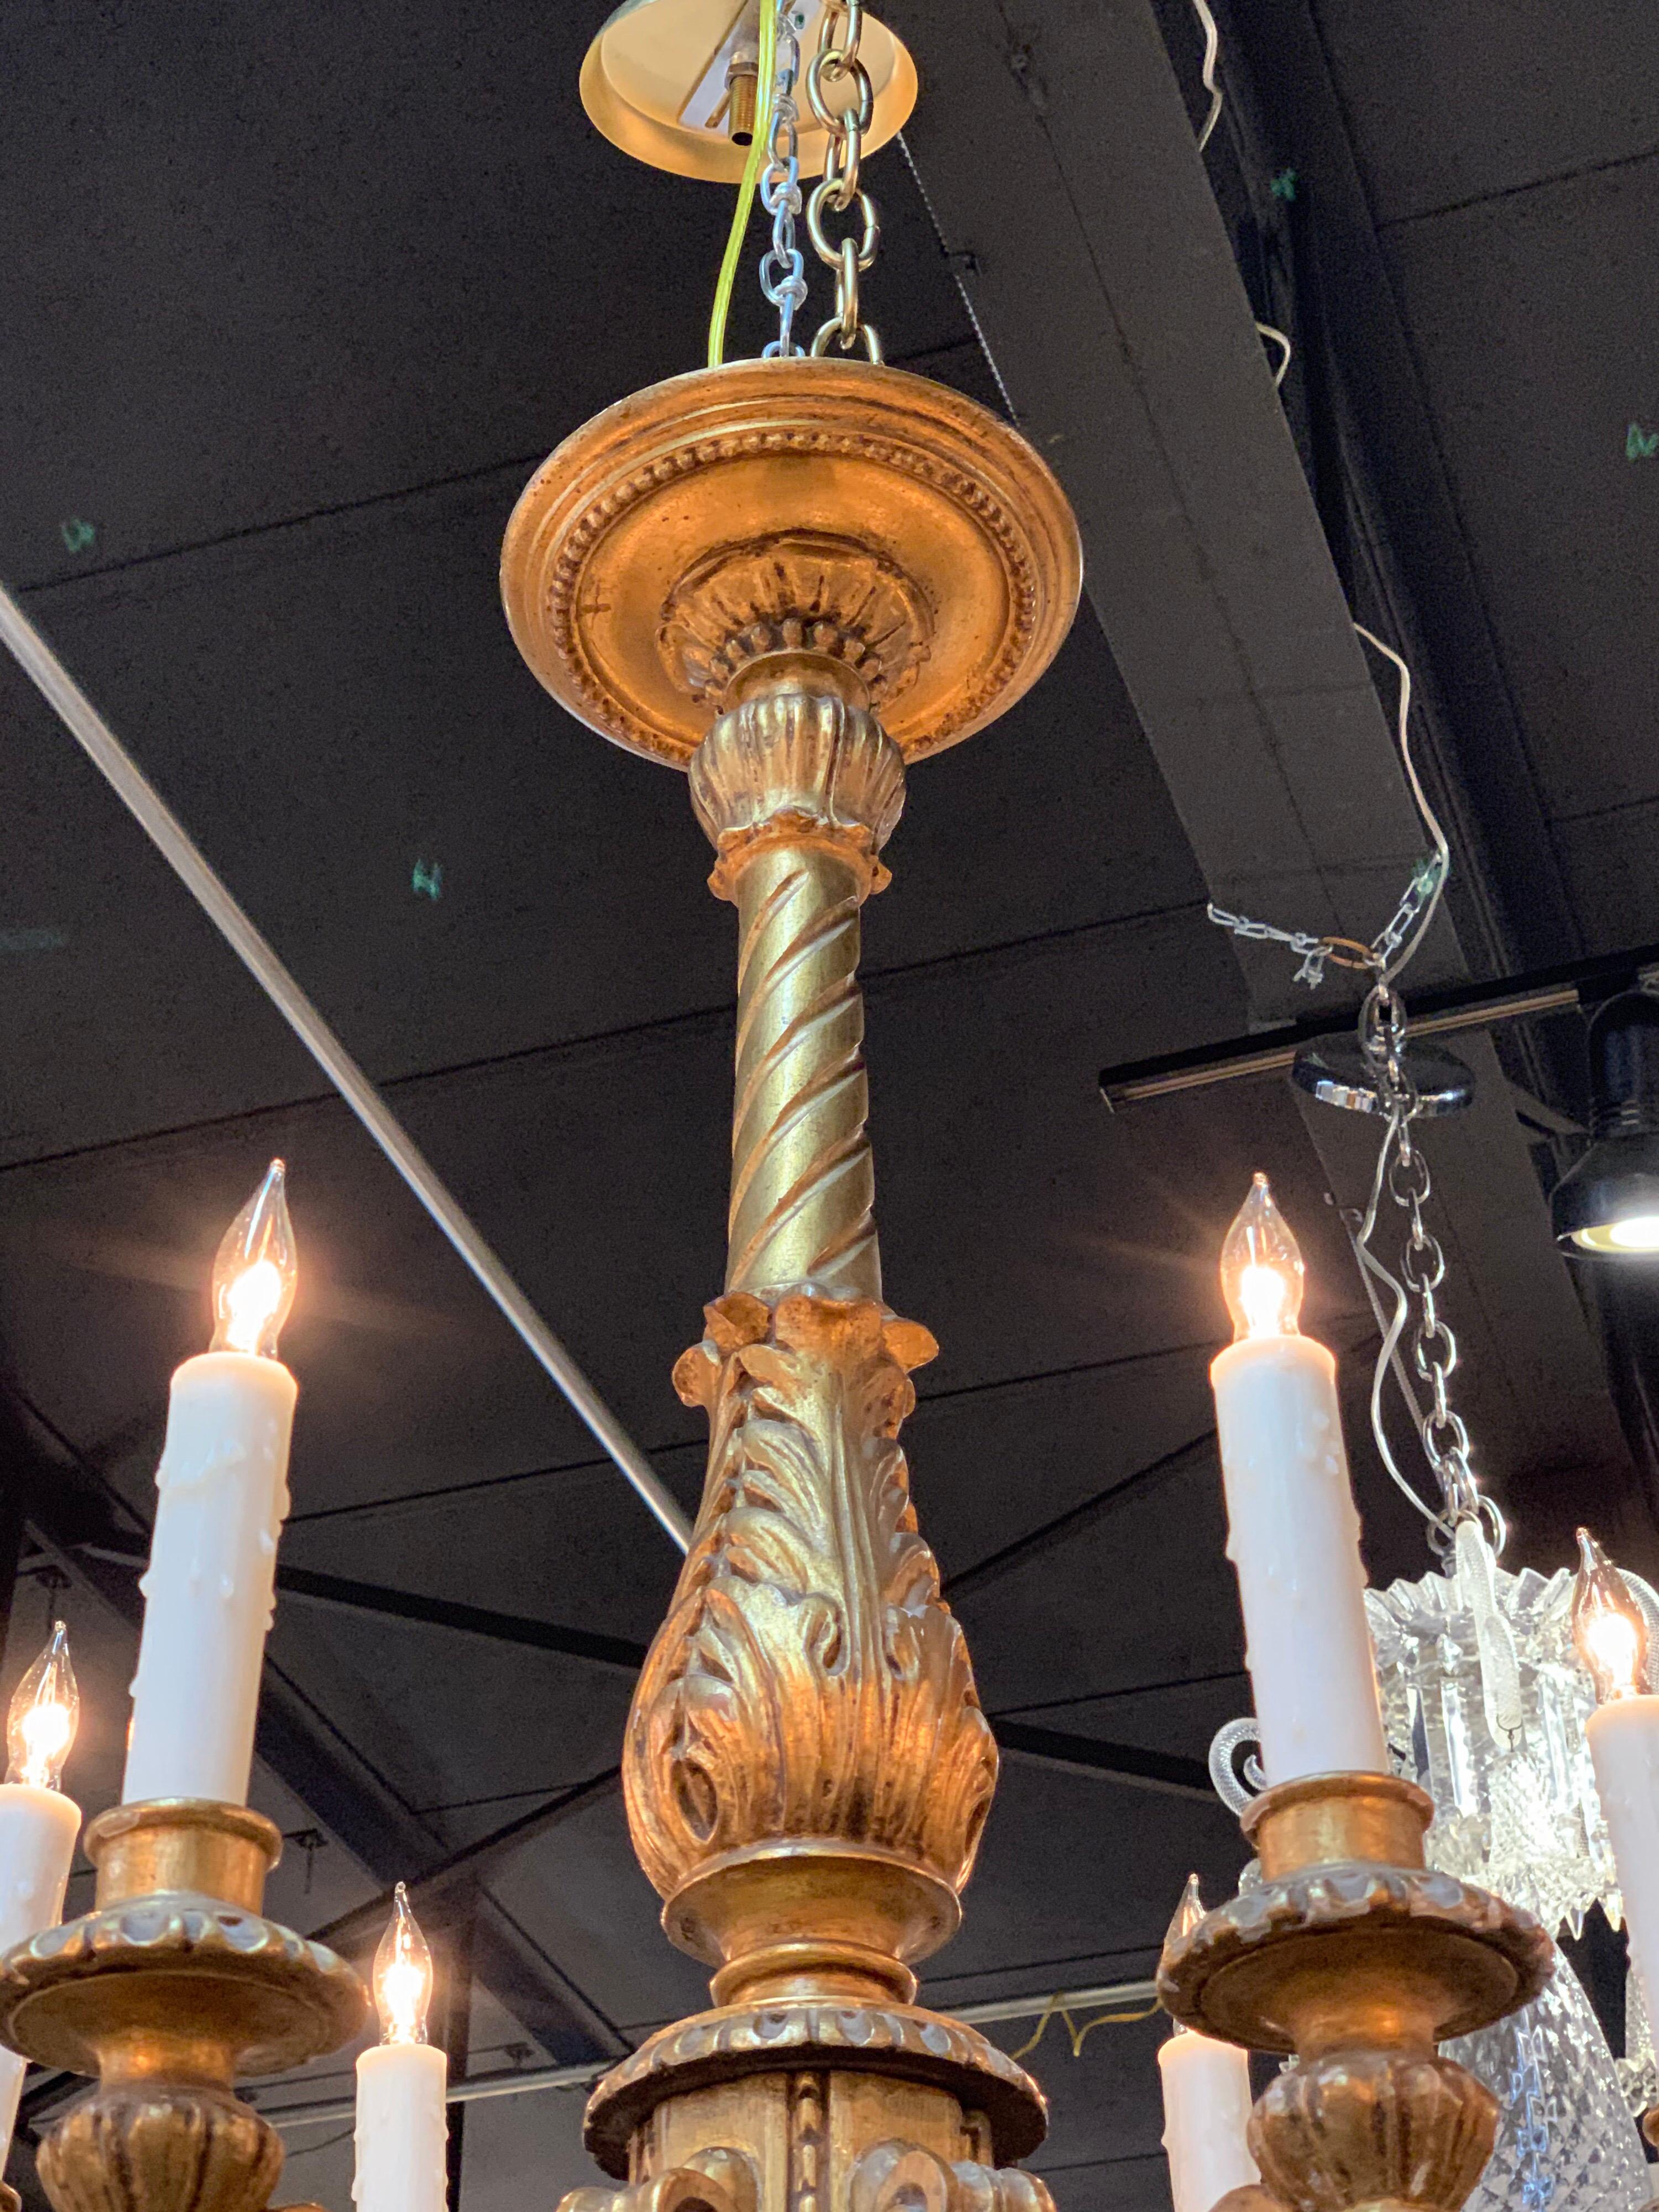 Very fine 19th century Italian and giltwood 12-light chandelier. Beautifully carved and high quality gilt finish. An exceptional fixture that creates a truly elegant look!